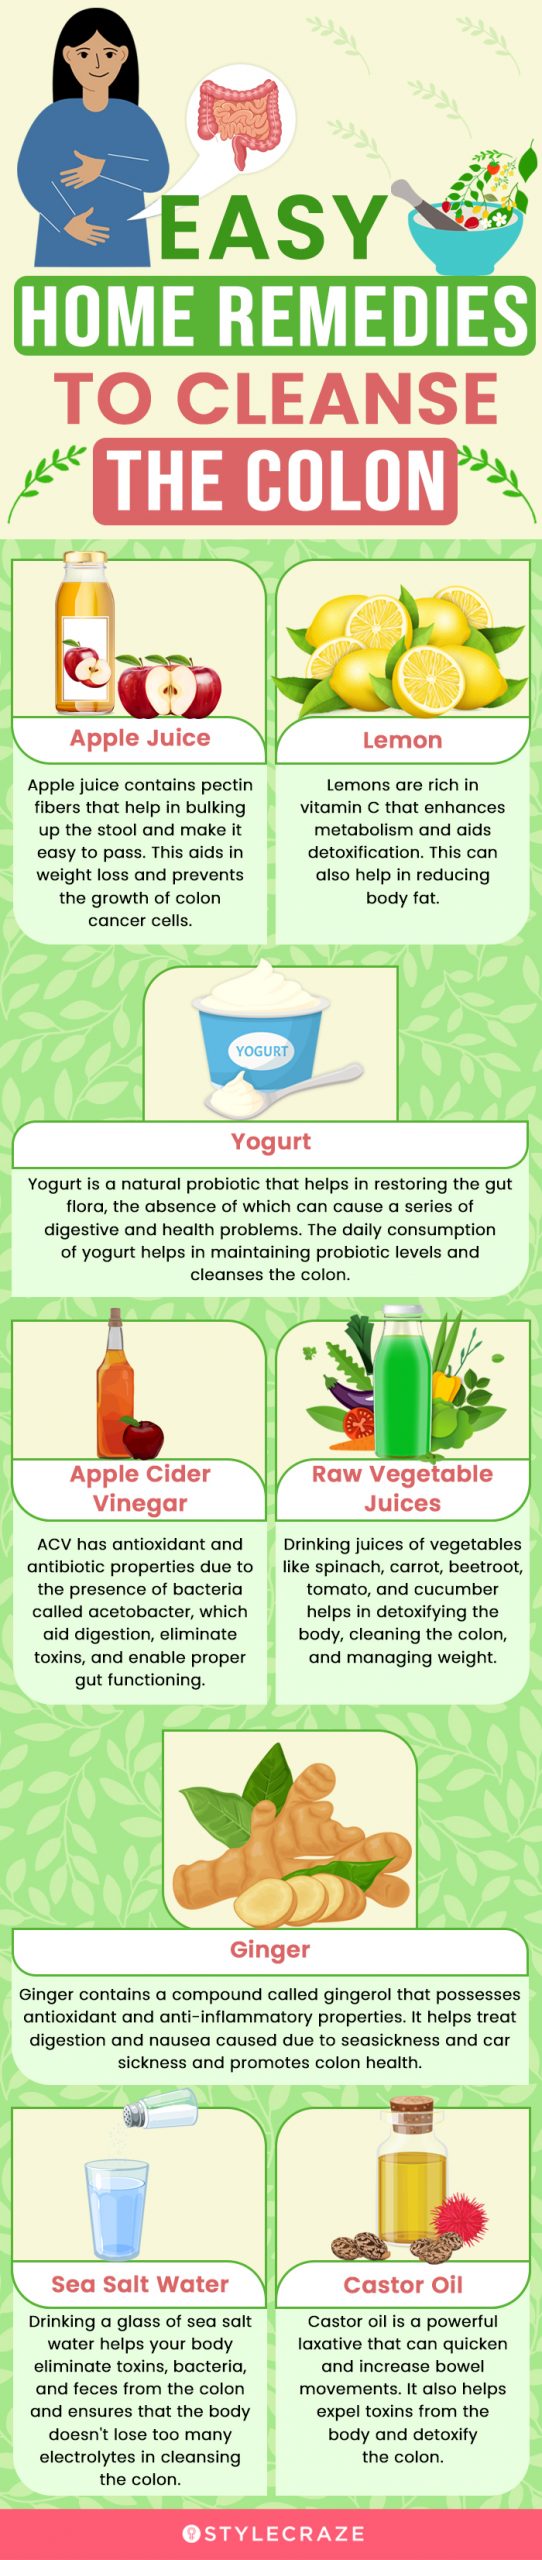 easy home remedies to cleanse colon (infographic)